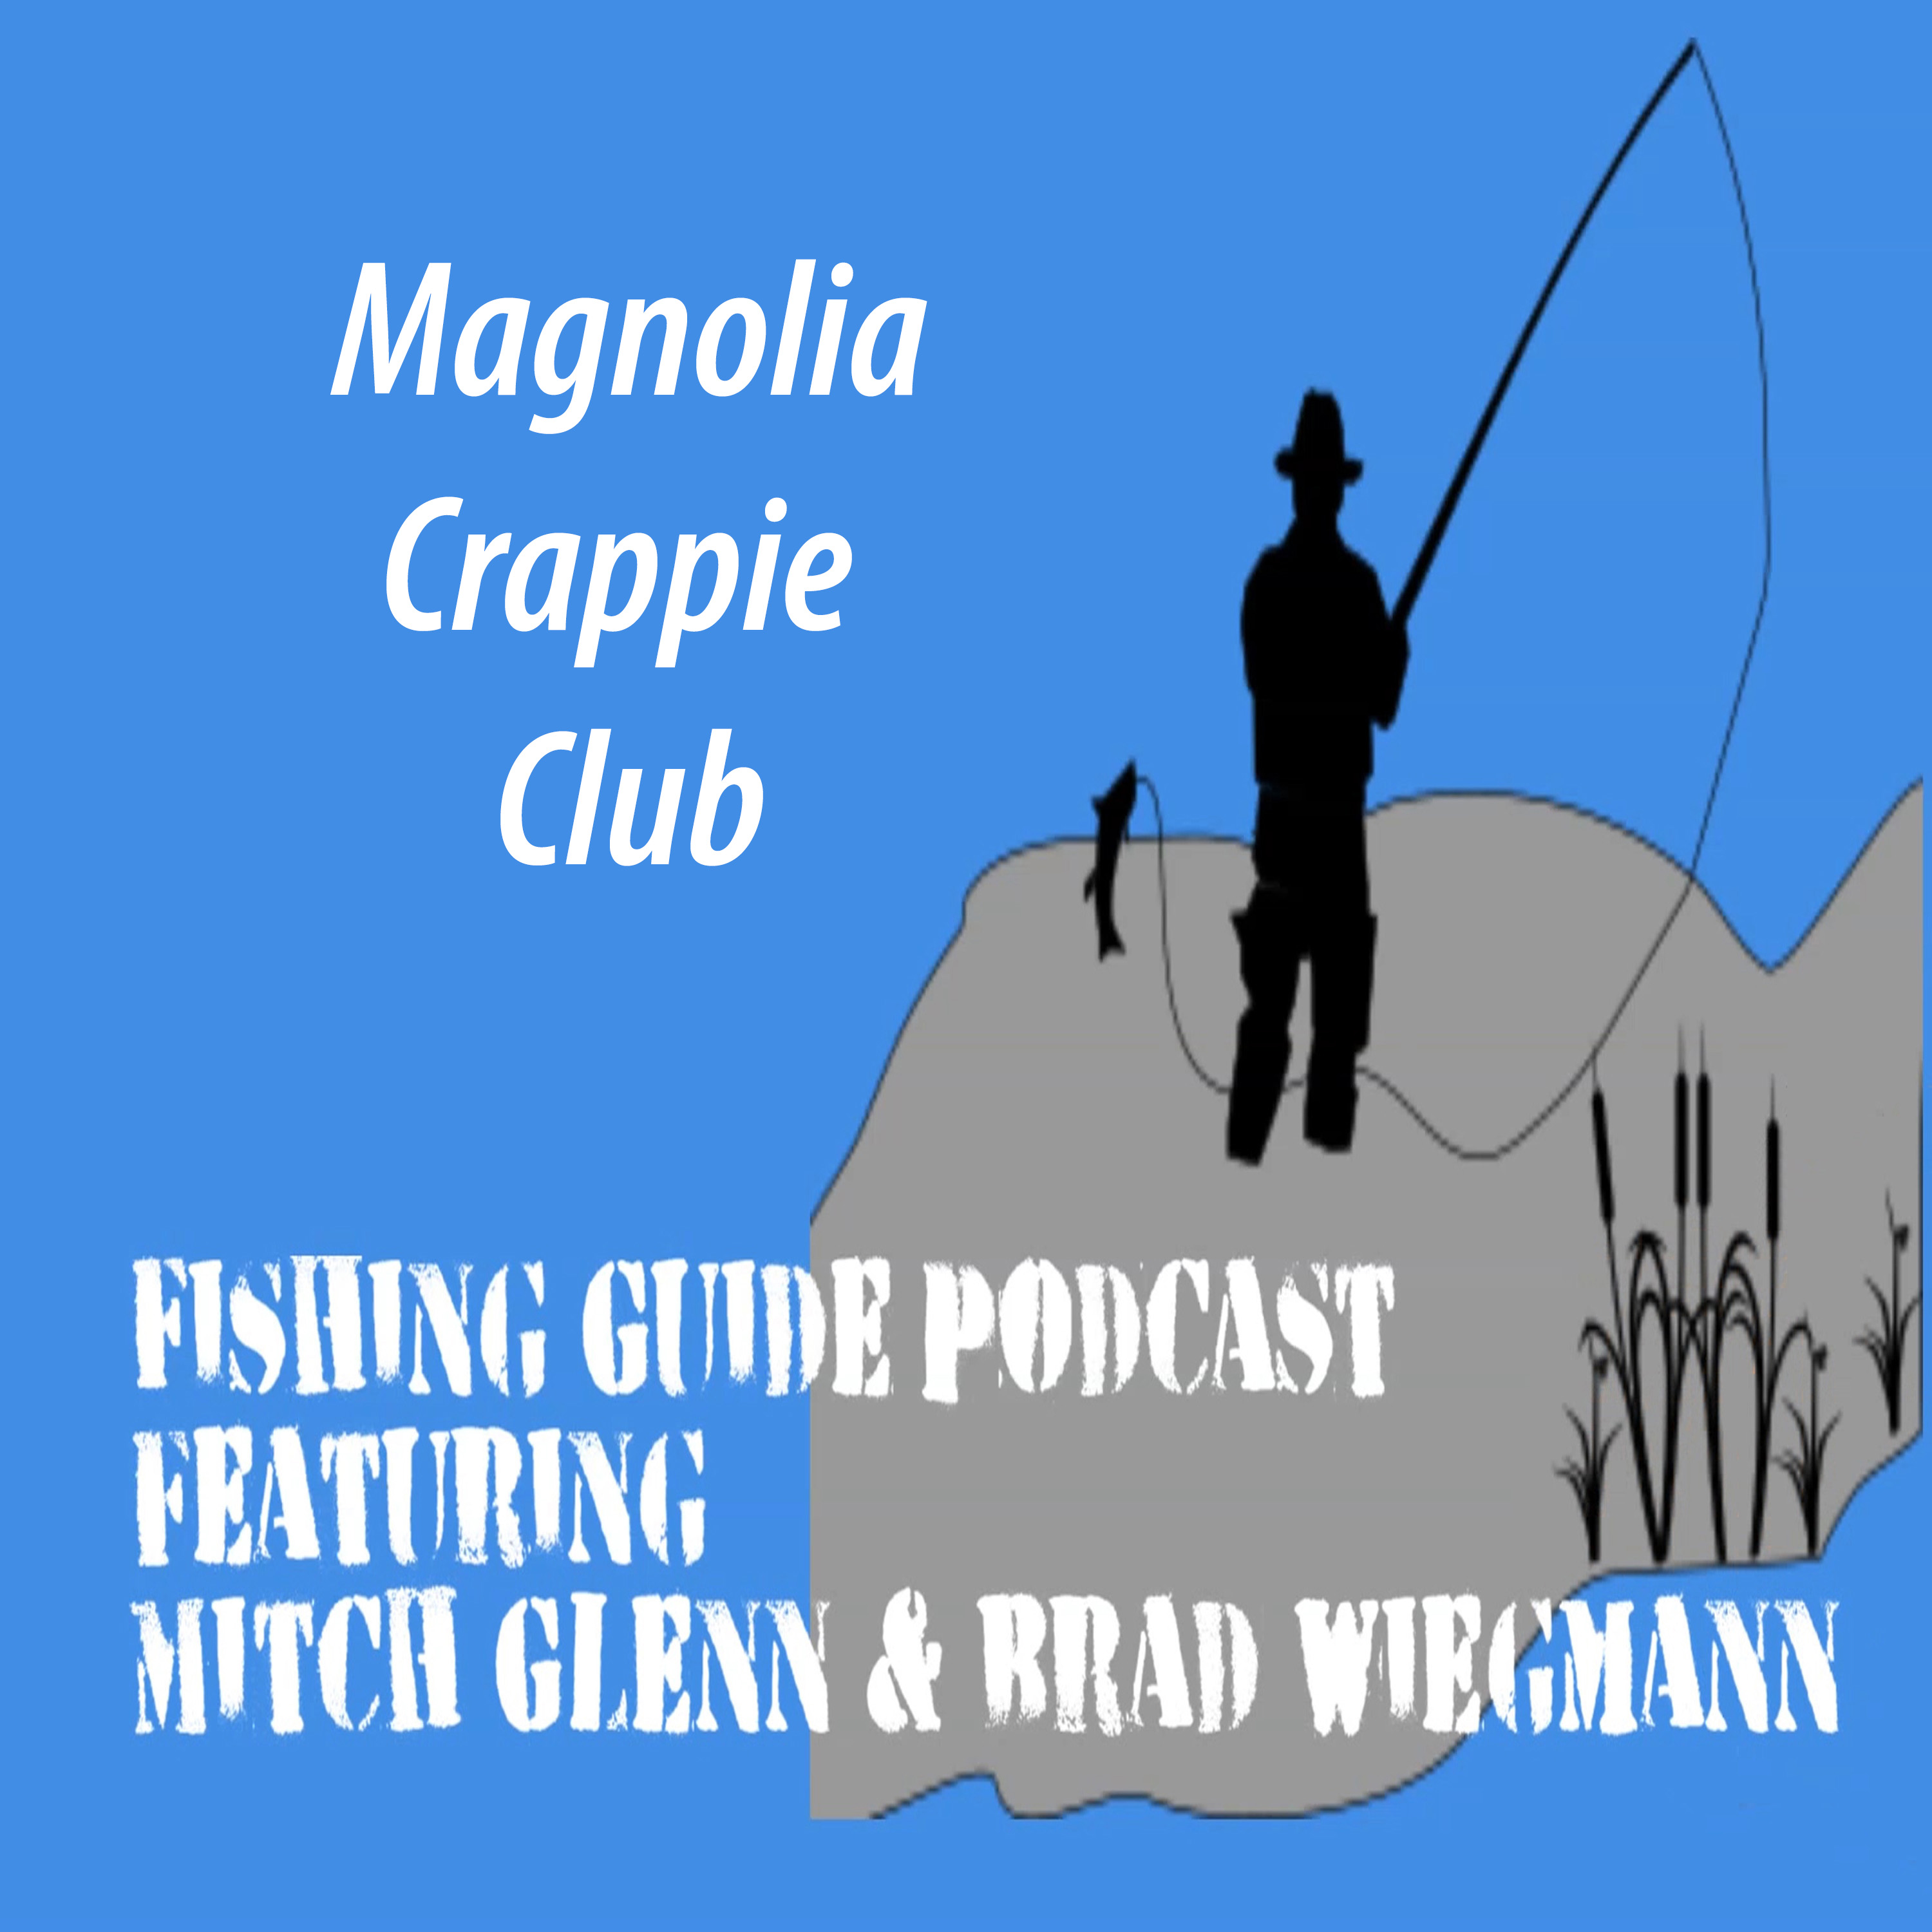 Magnolia Crappie Club the oldest and largest state crappie club